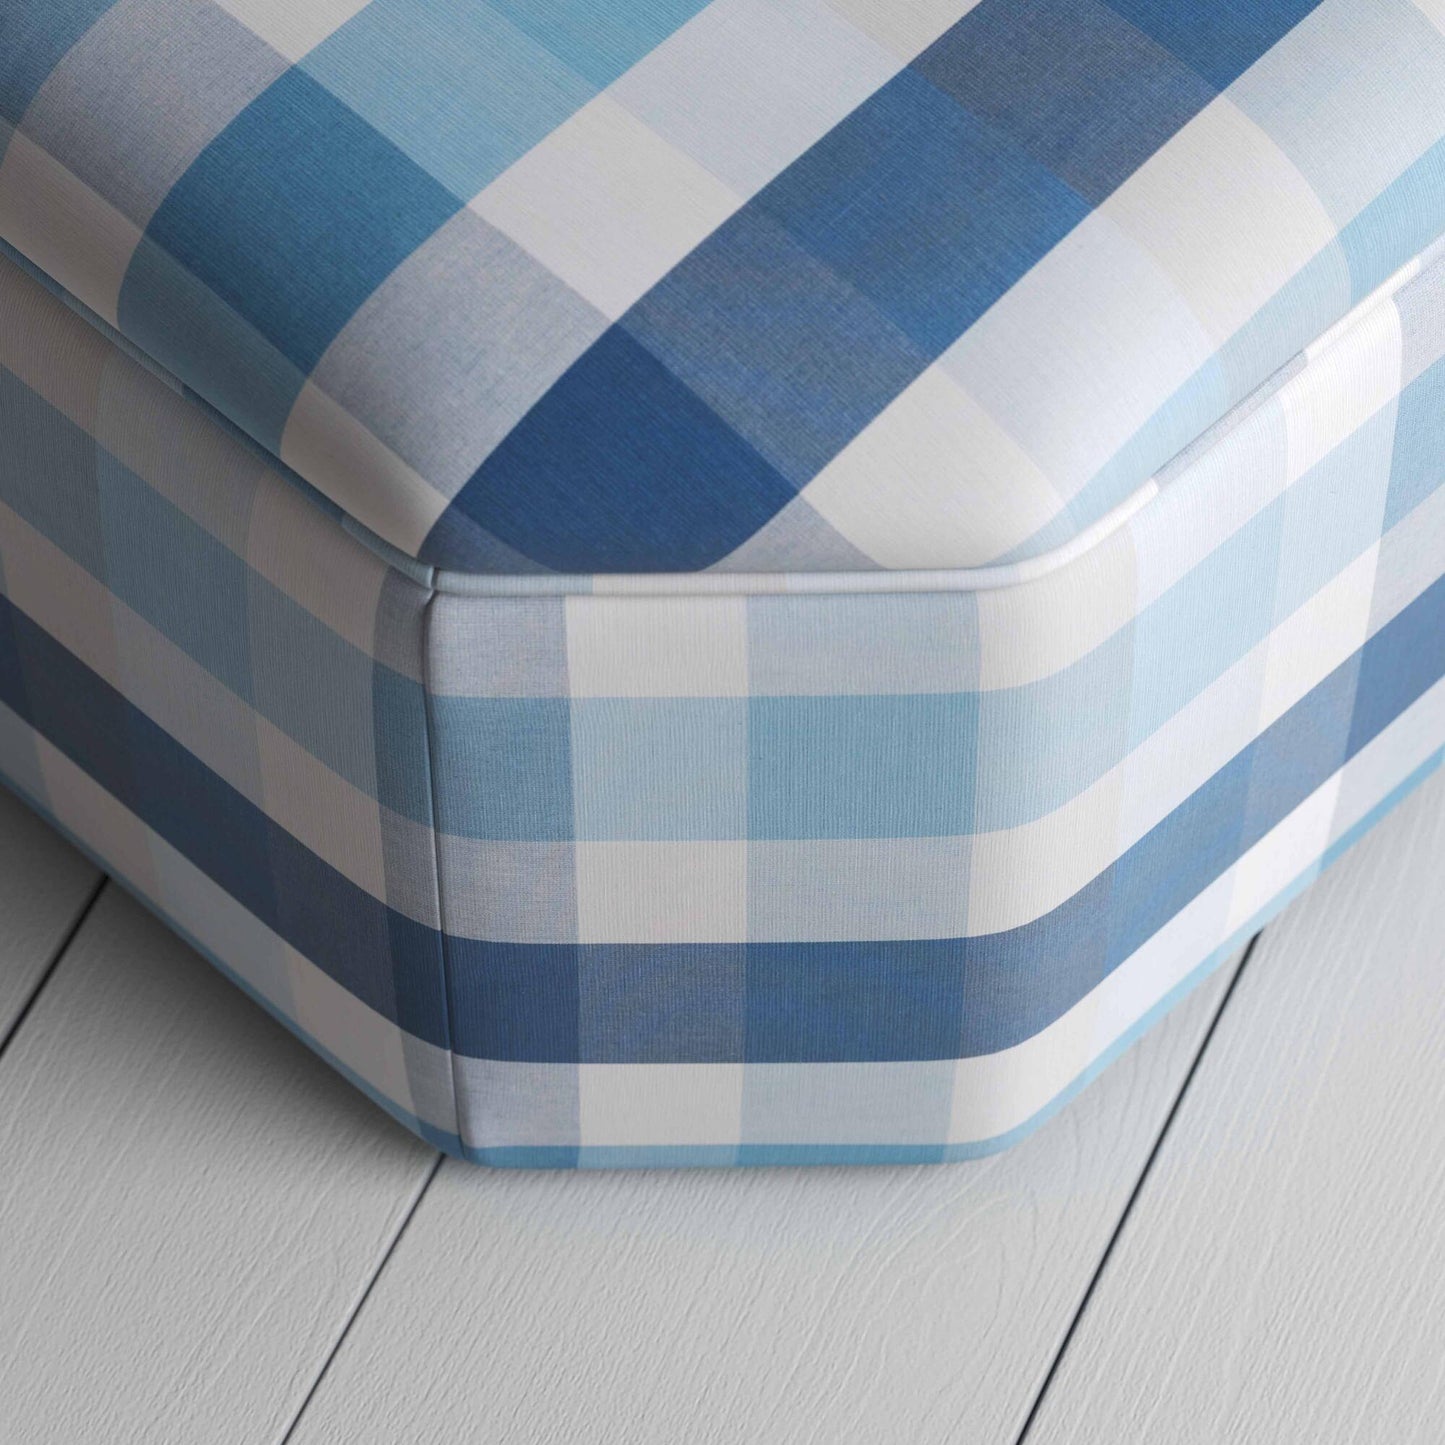 Hither Hexagonal Ottoman in Checkmate Cotton, Blue